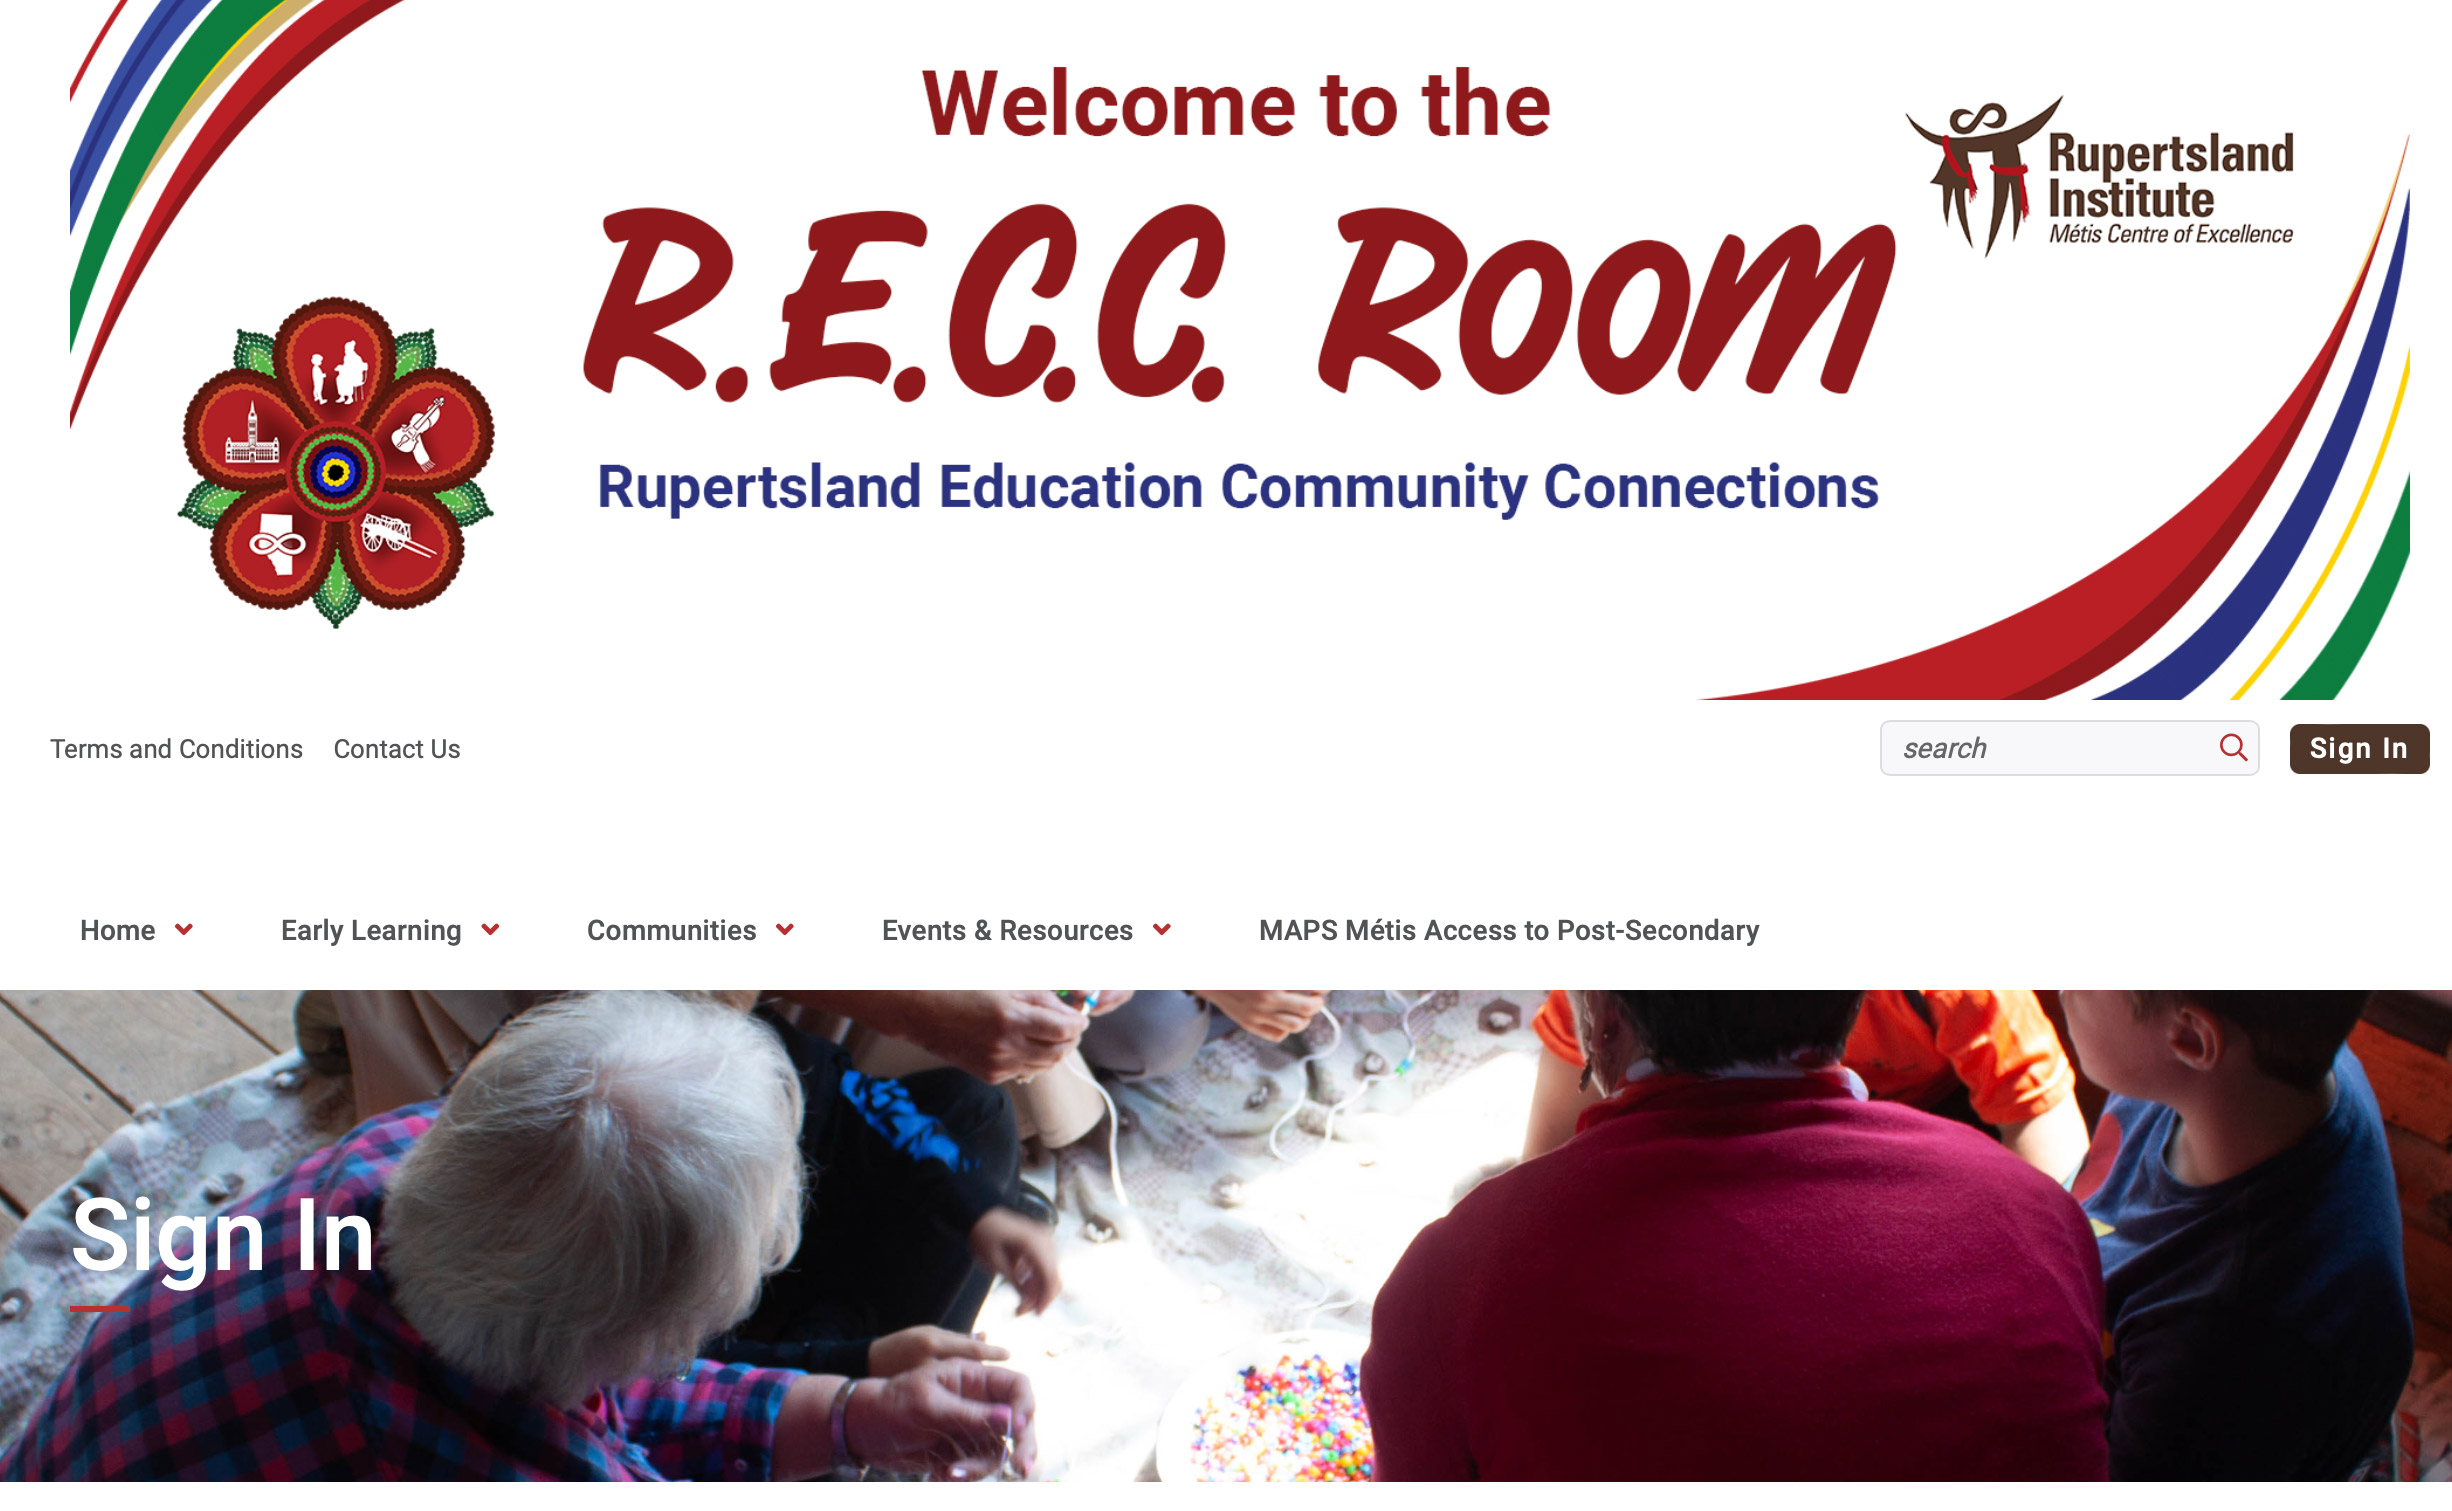 Early Learning - RECC Room